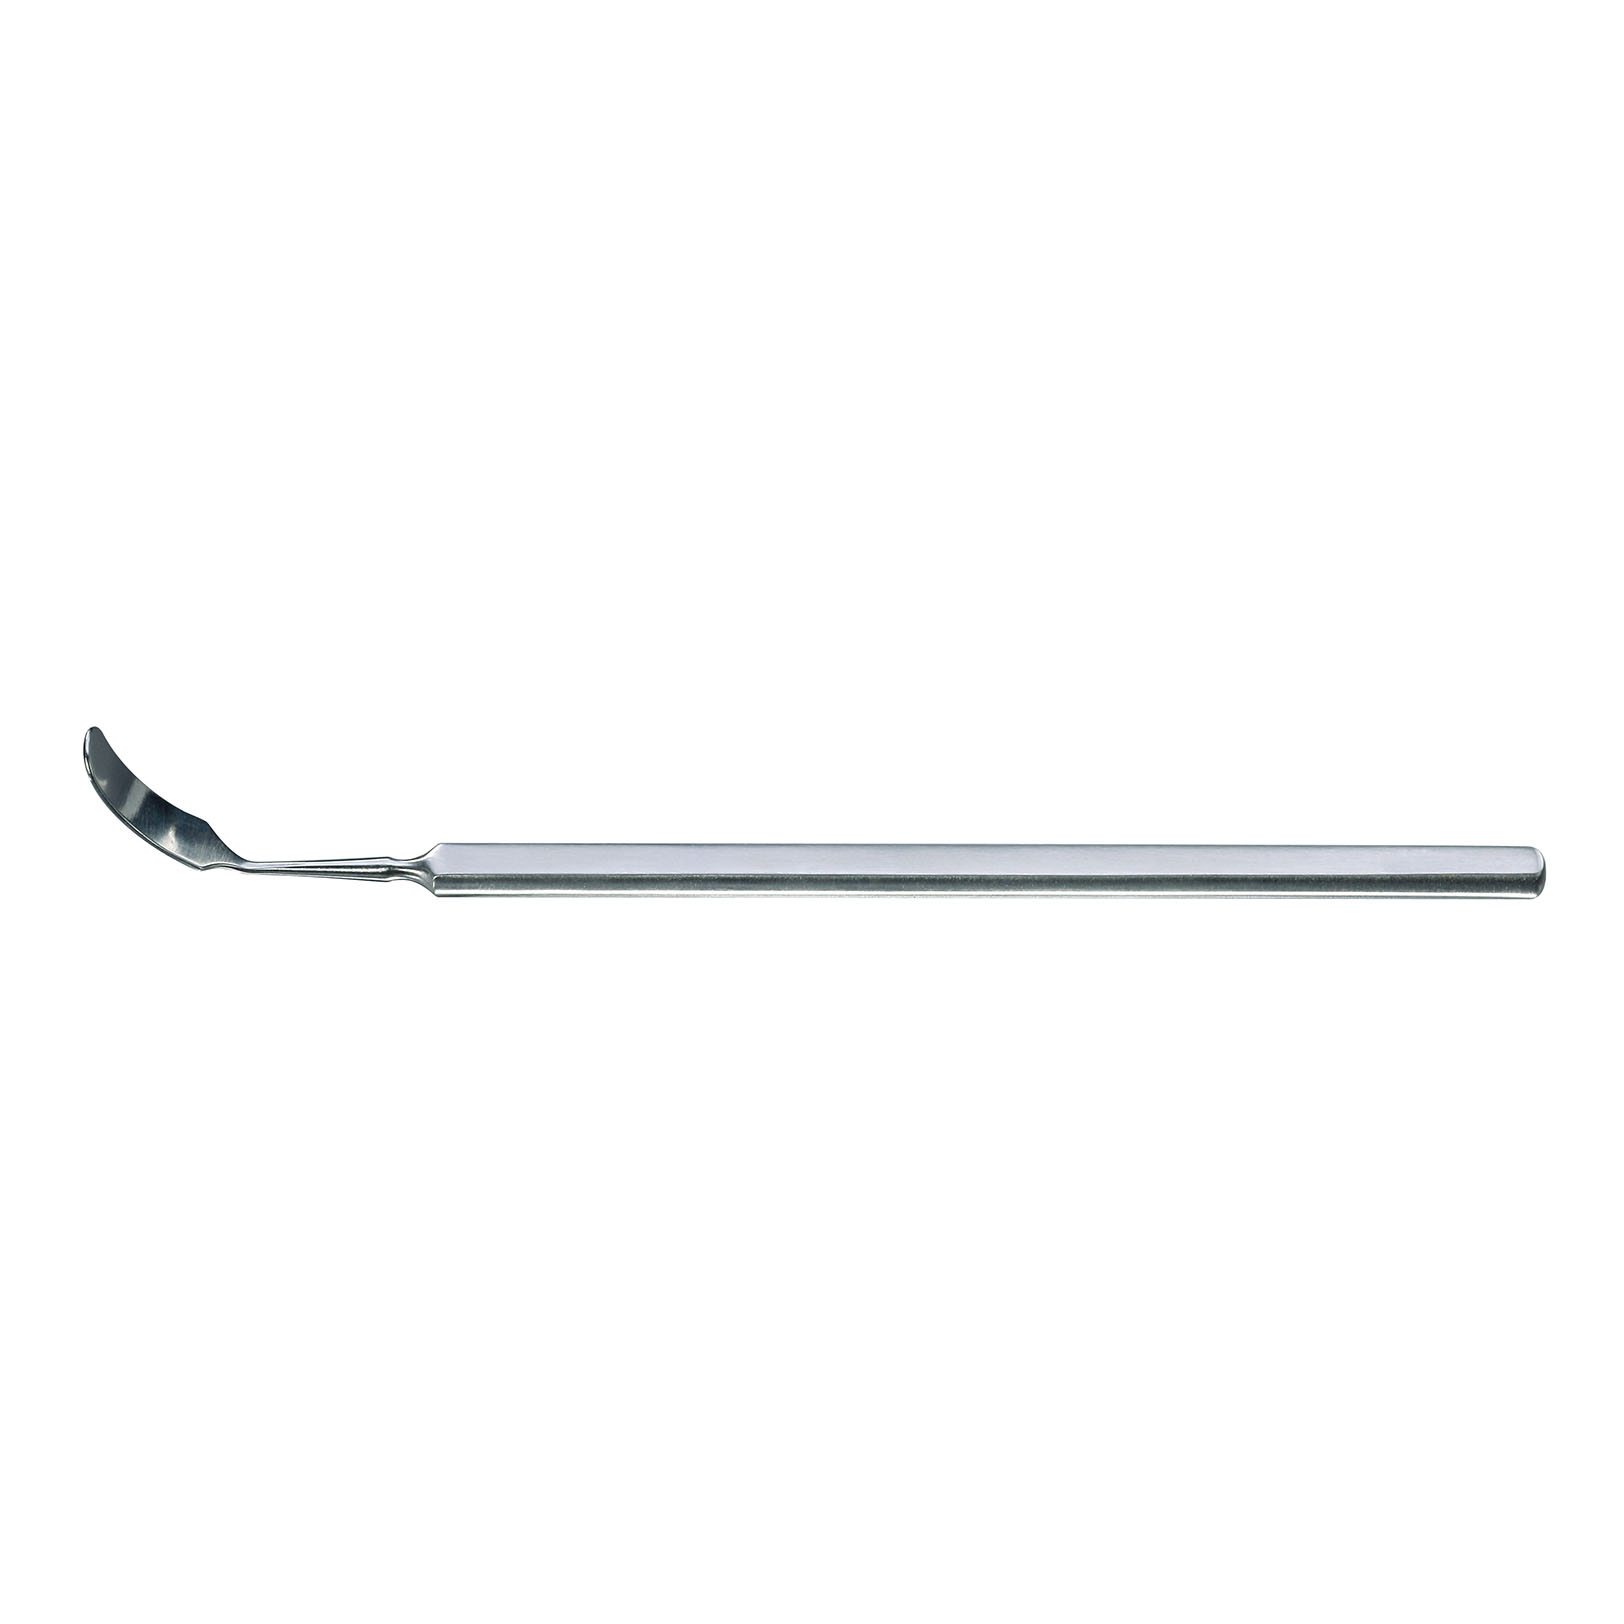 IF-8129 Stainless Steel Muscle hook